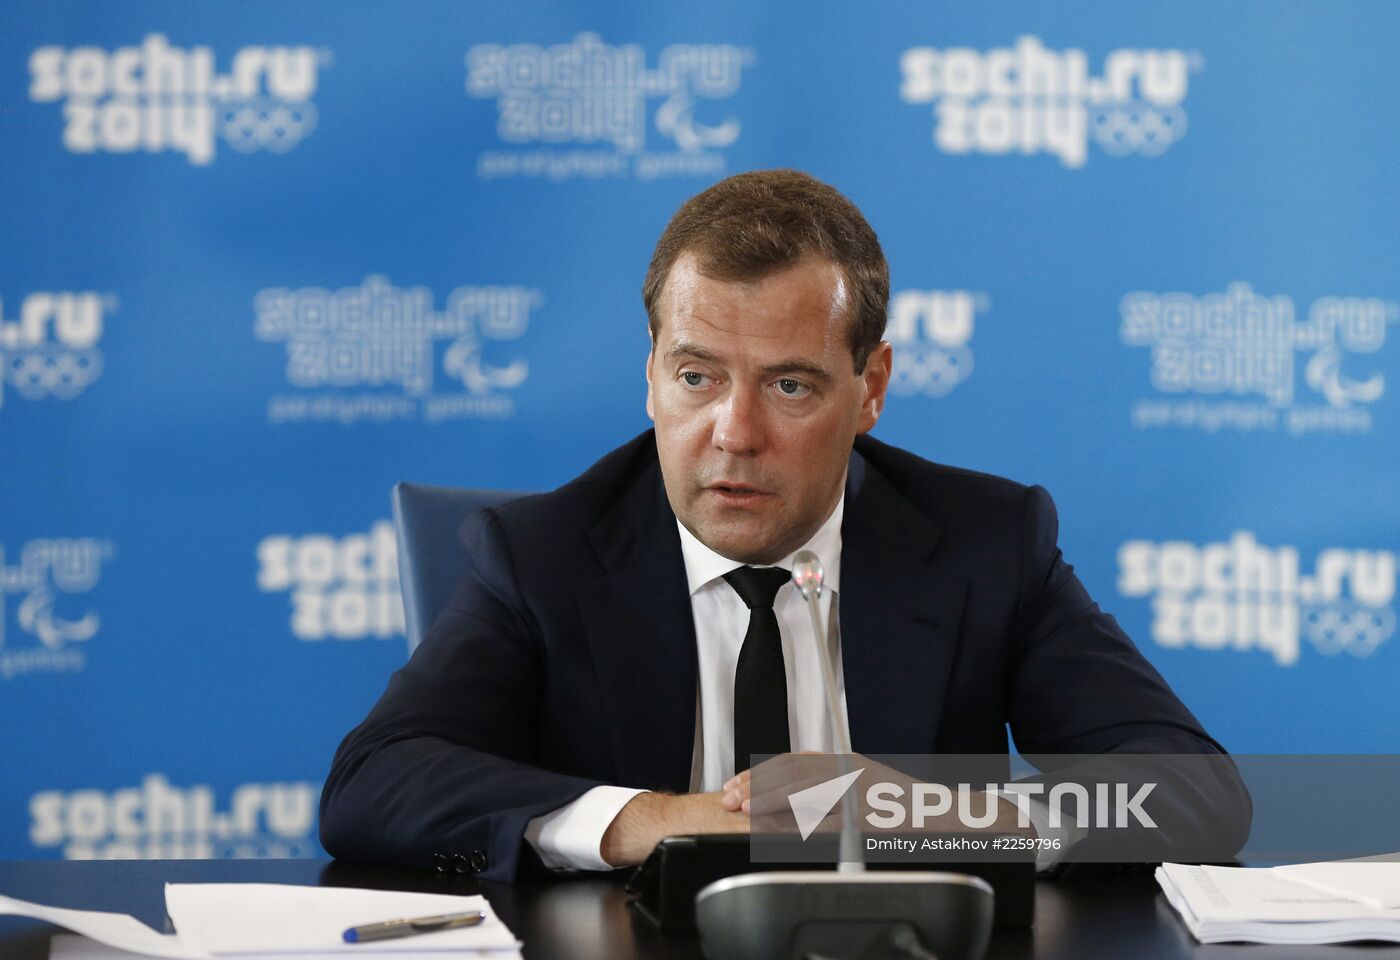 Medvedev chairs meeting on preparations for Sochi Olympics